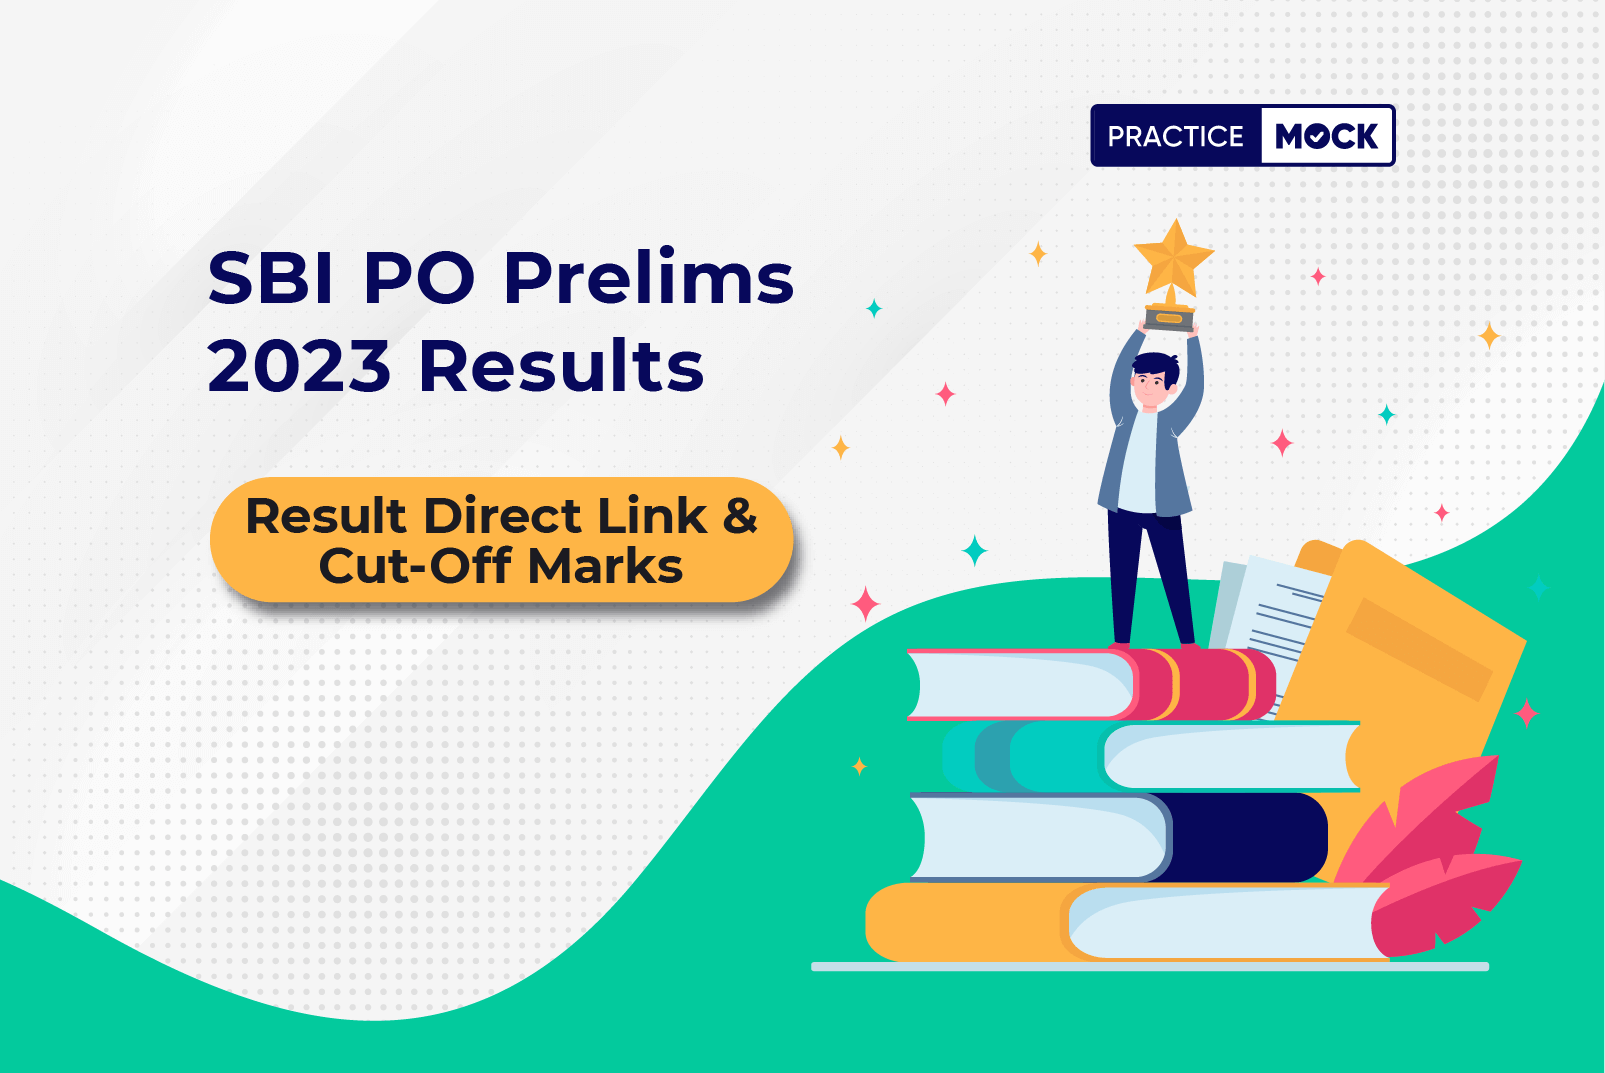 SBI PO Prelims 2023 Results, SBI PO Result Direct Link and Cut-Off Marks